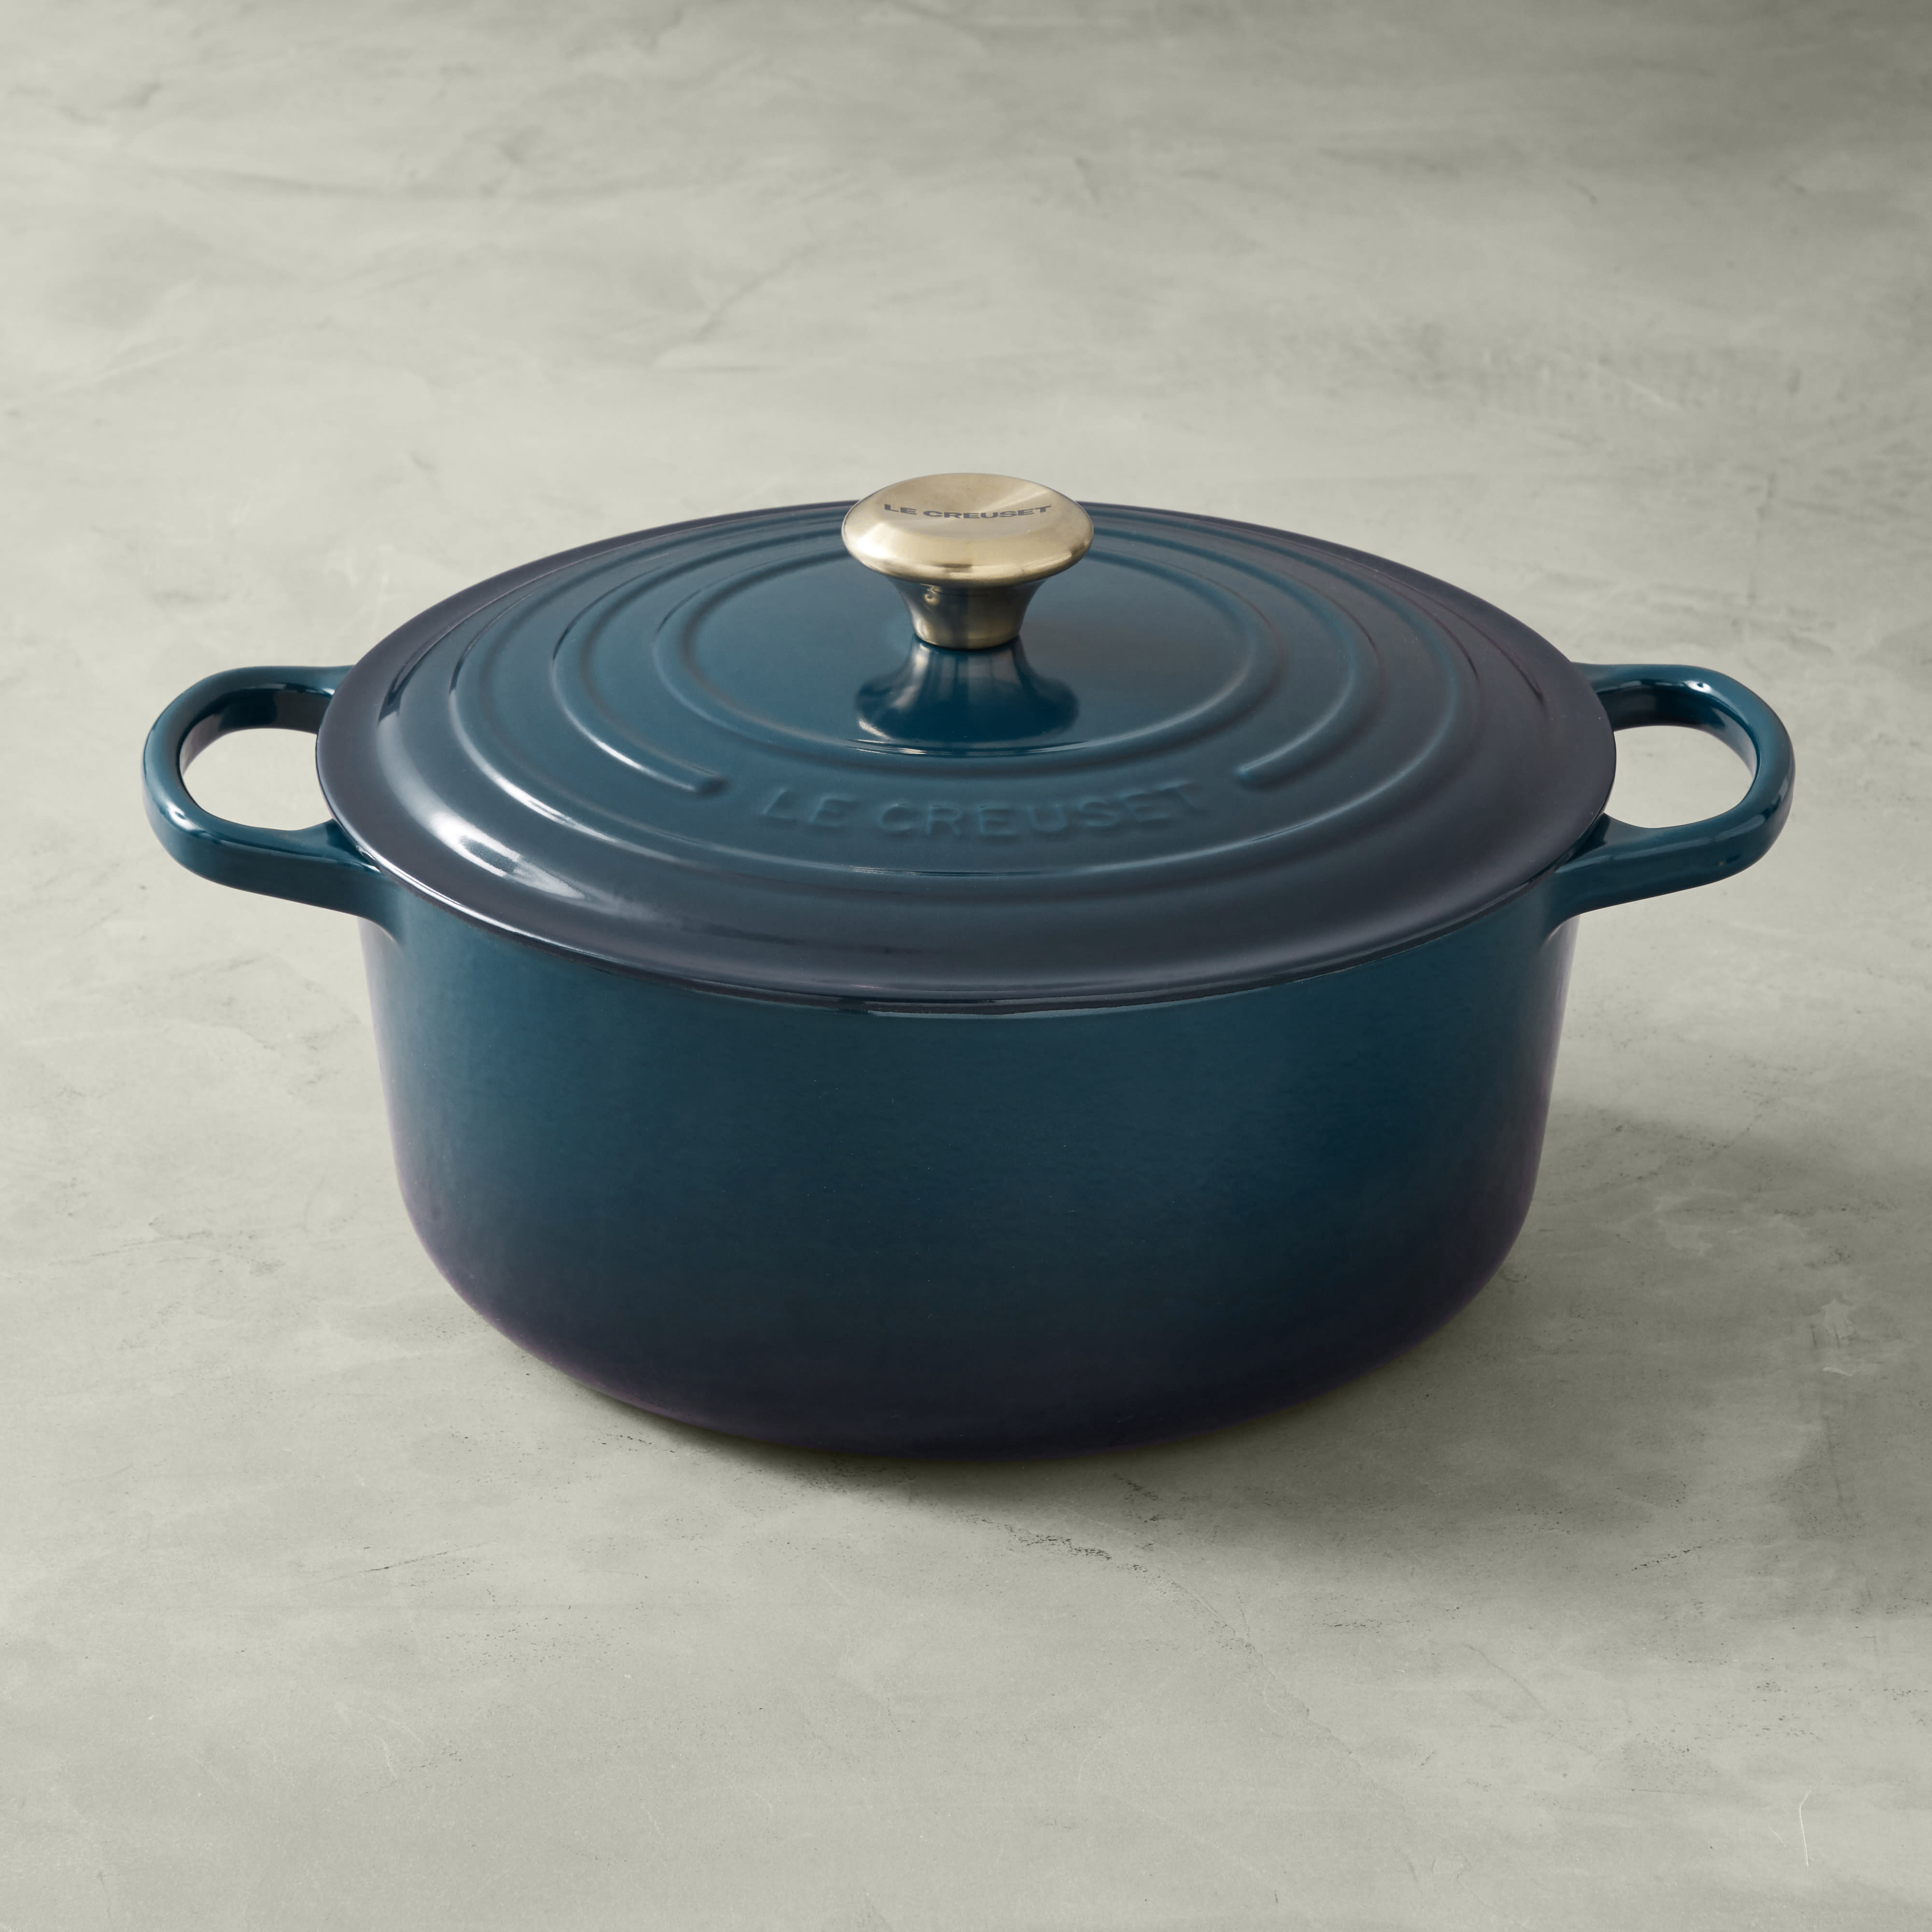 Lodge Cast Iron Unveils Only Line of Colorful Enameled Cast Iron